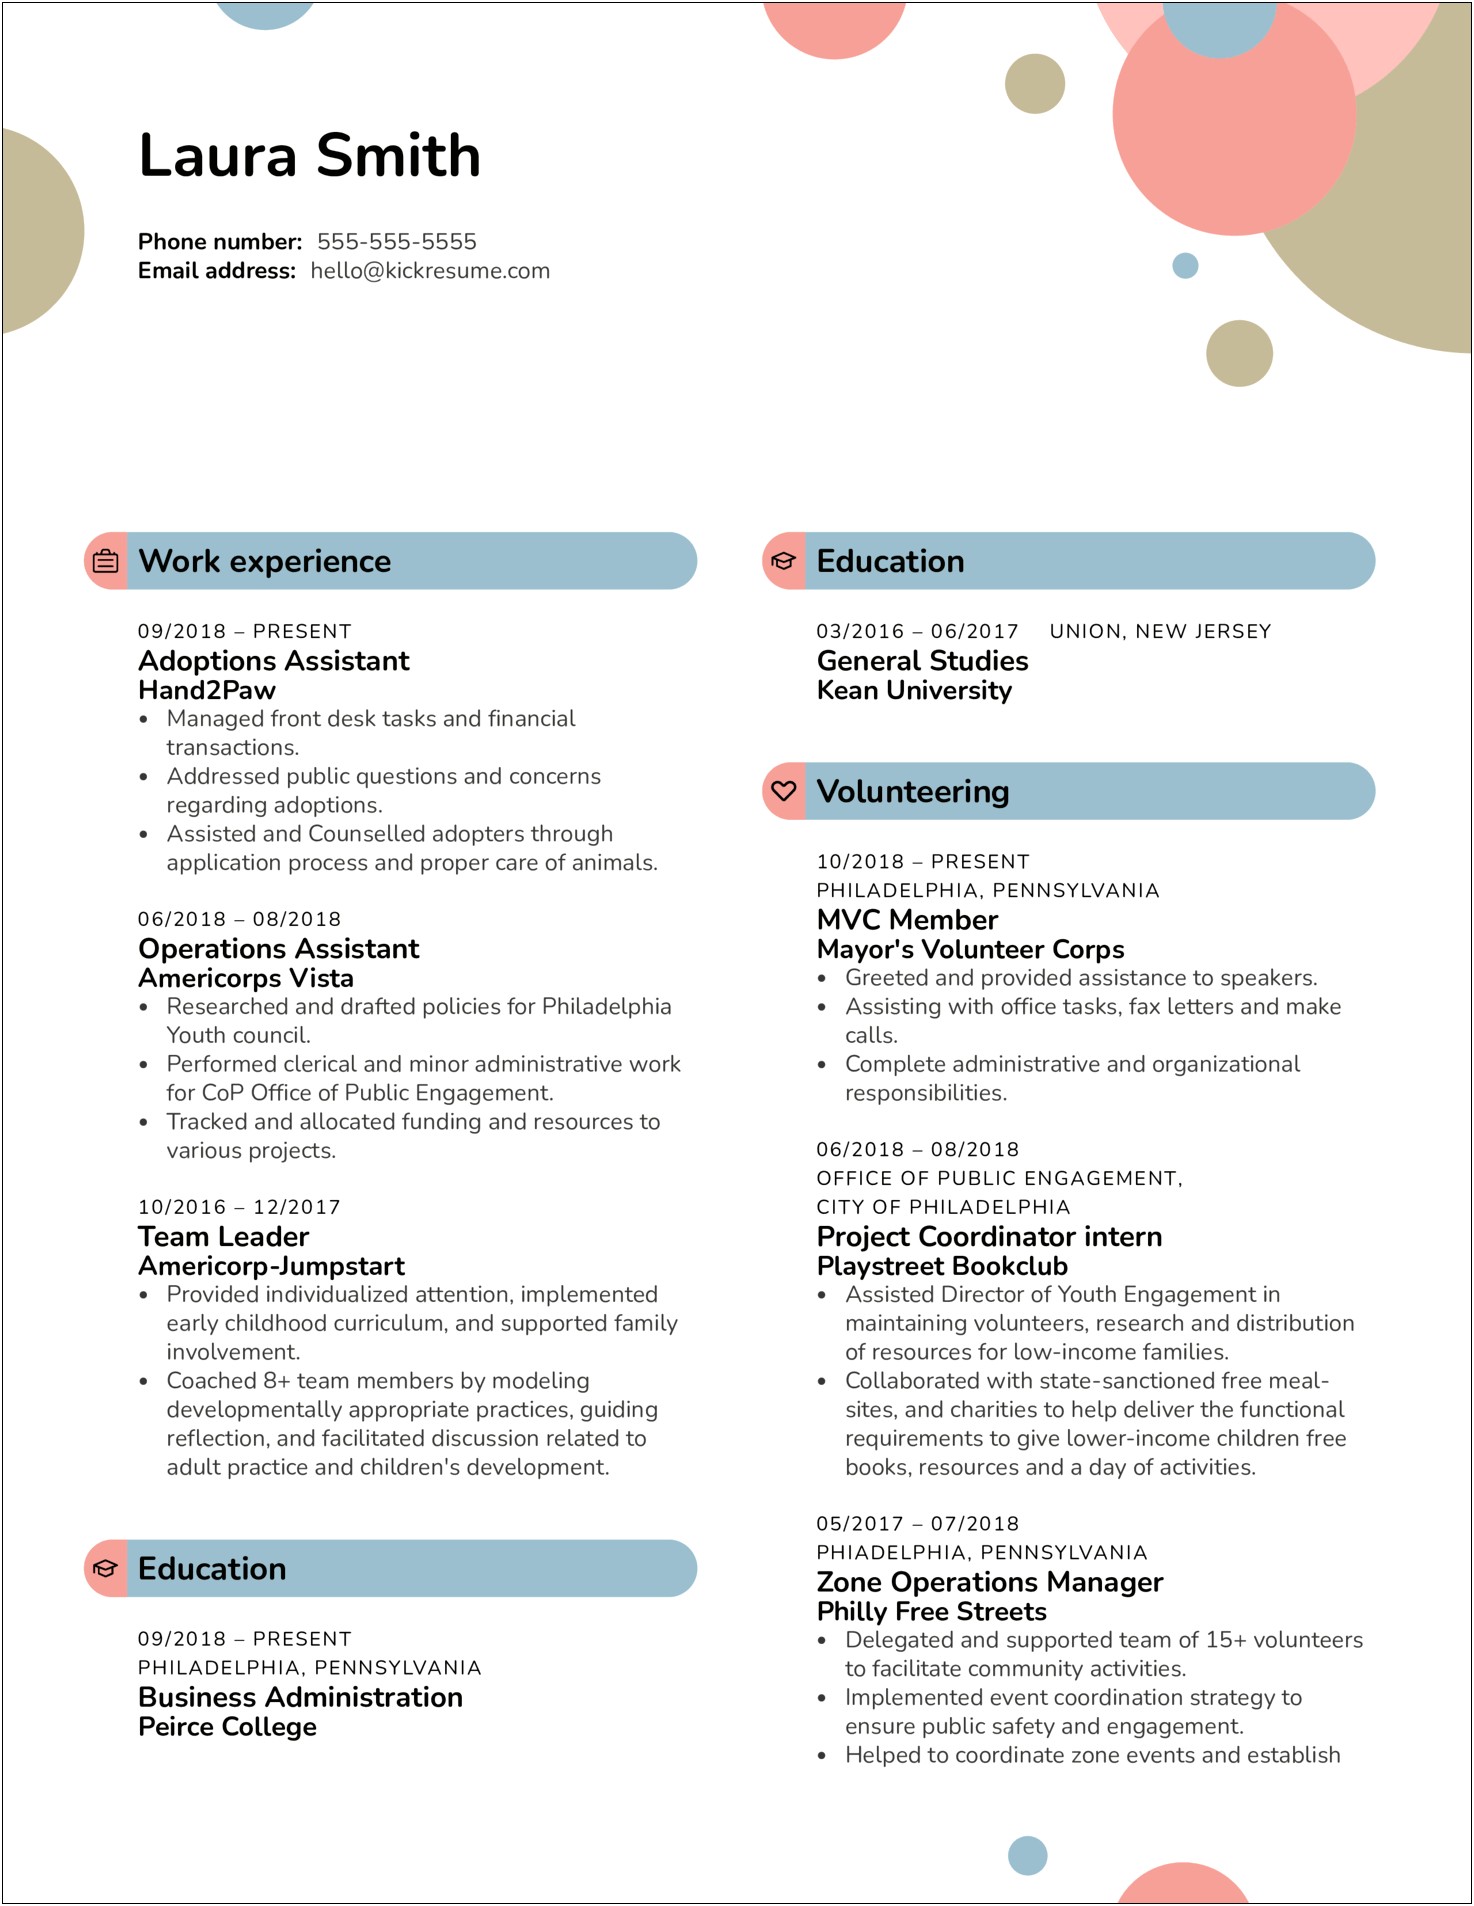 Child Care Center Director Resume Examples